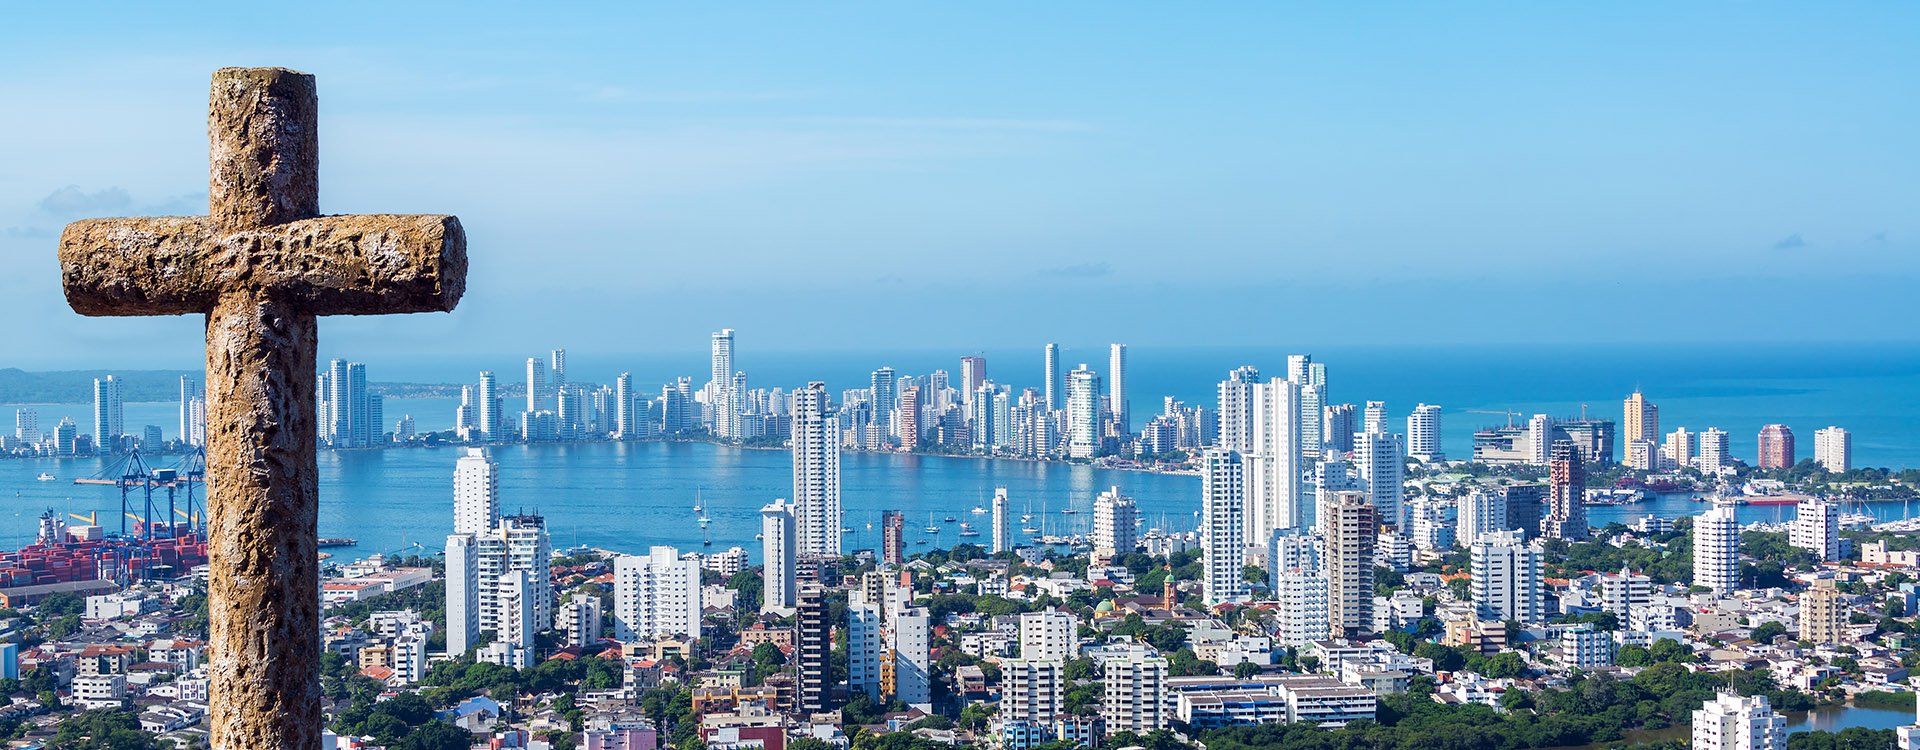 View of the modern part of Cartagena, Colombia